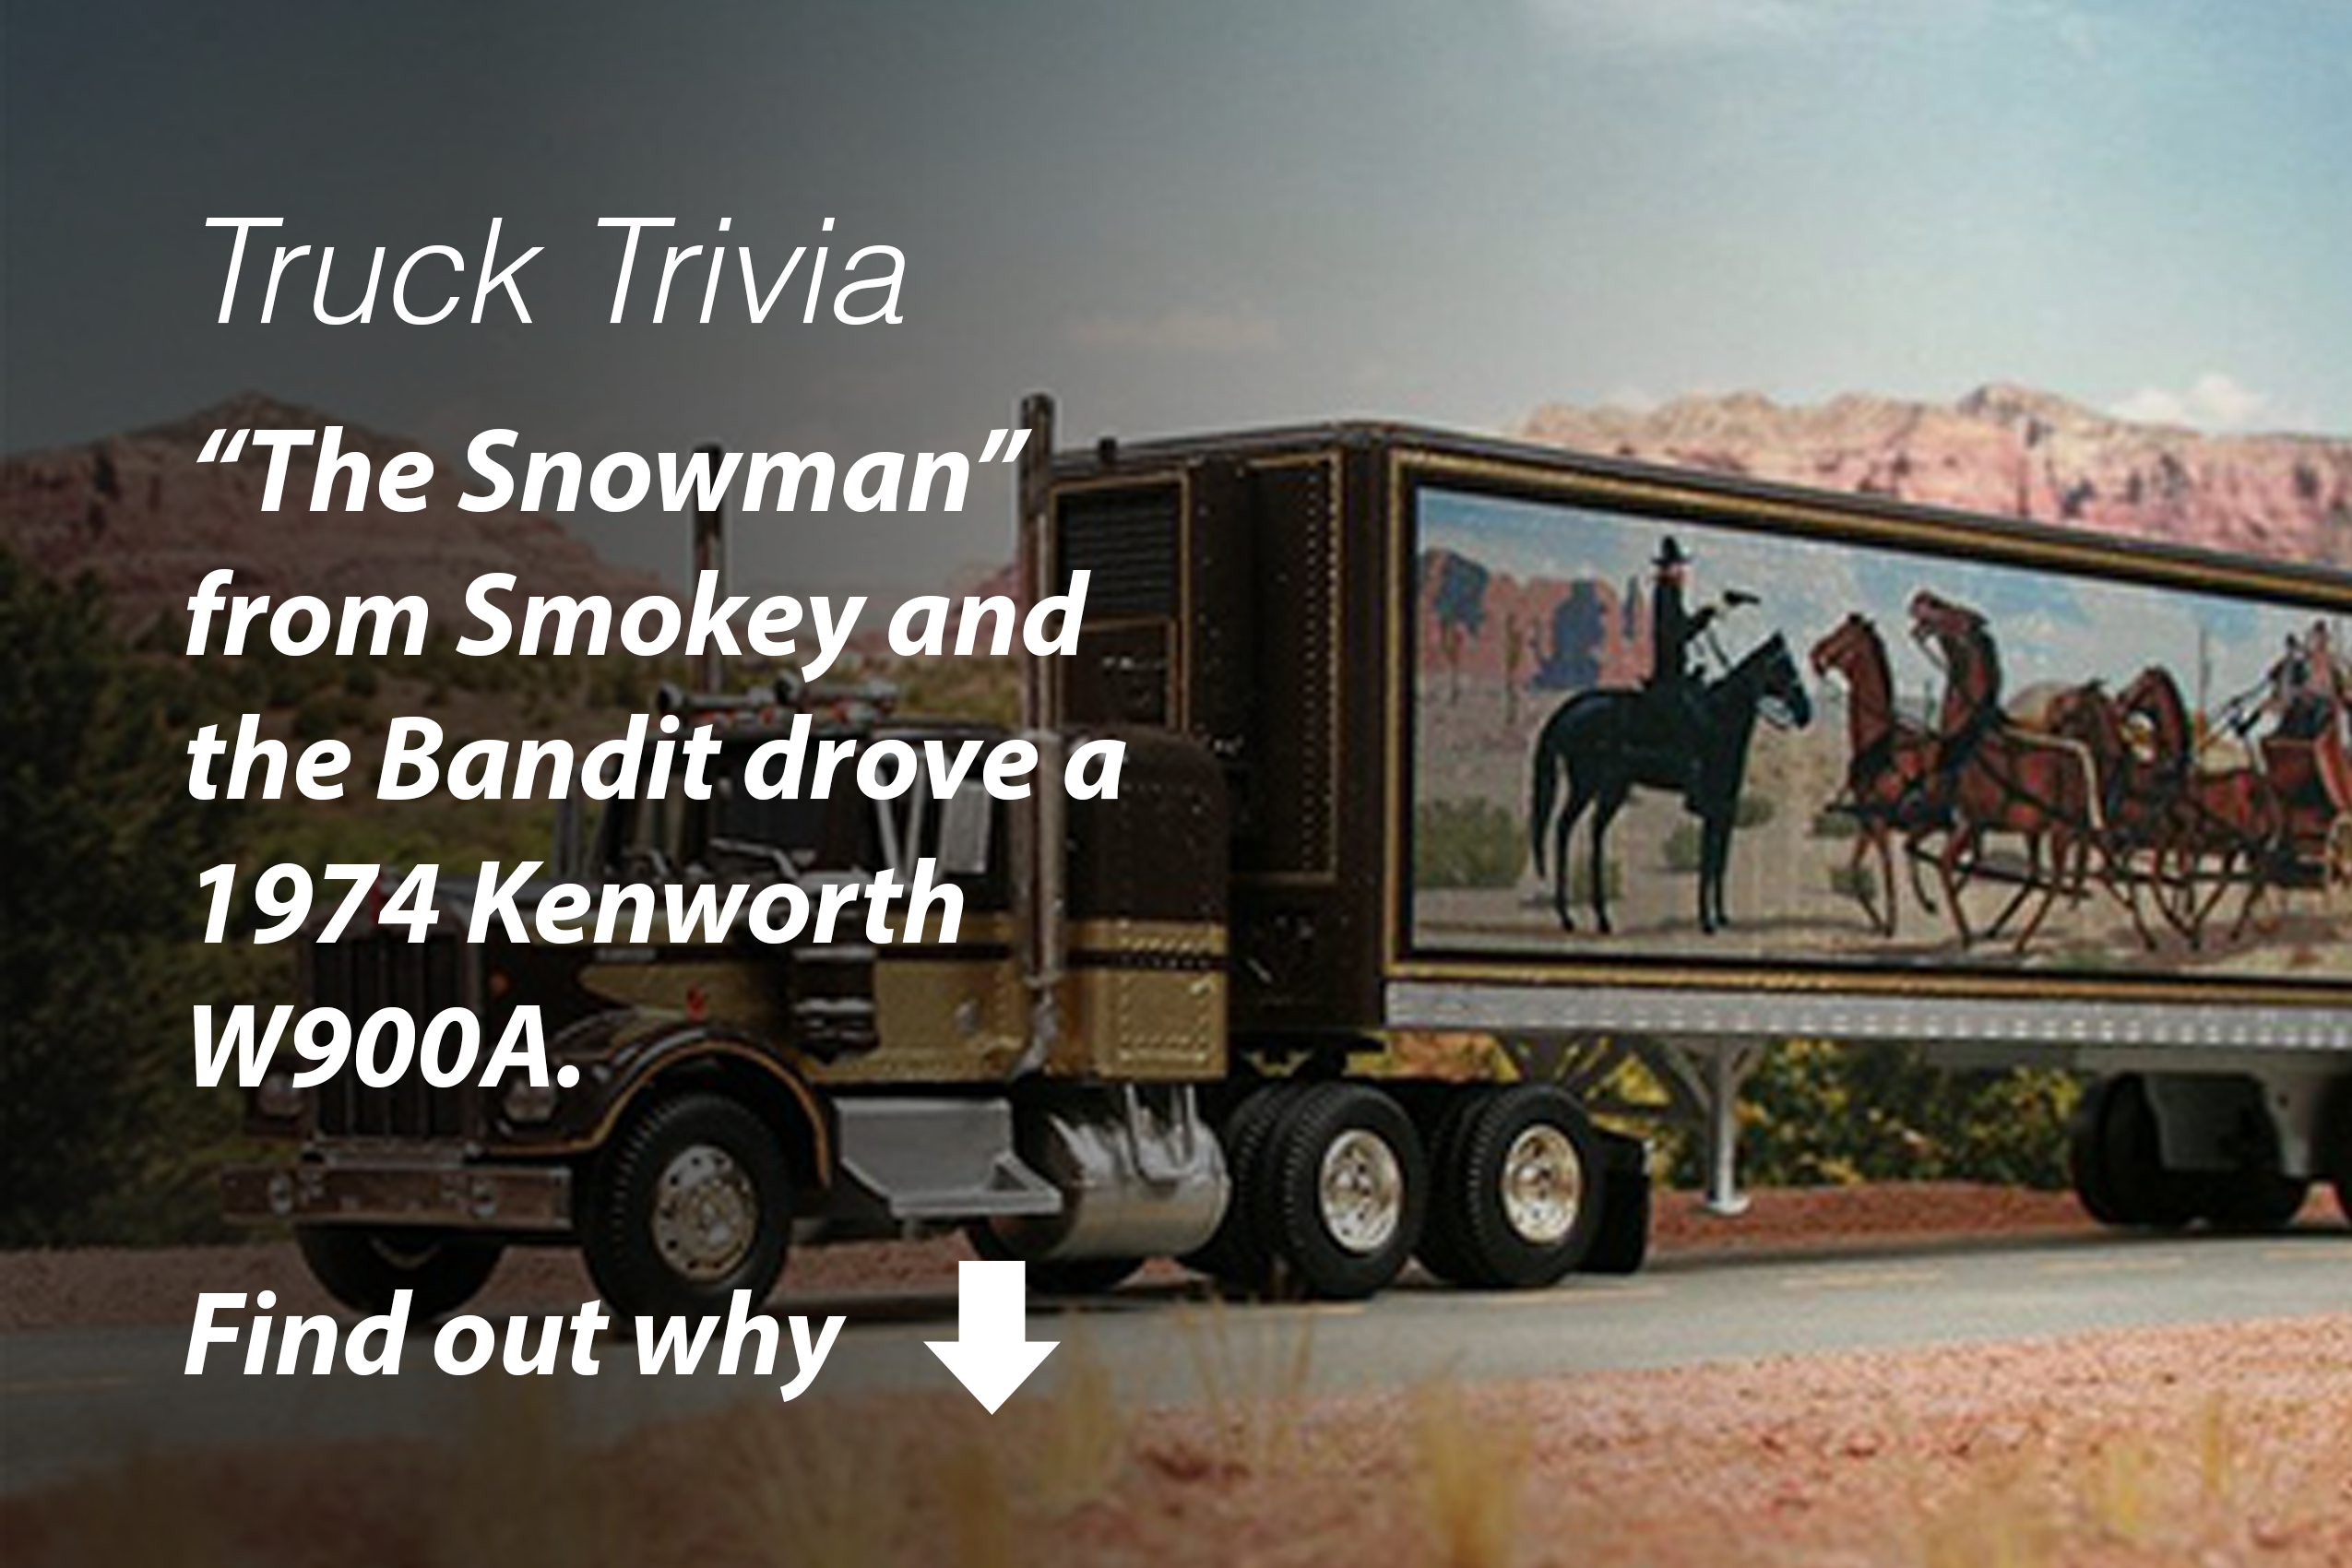 Smokey and the Bandit, Snowman's Truck